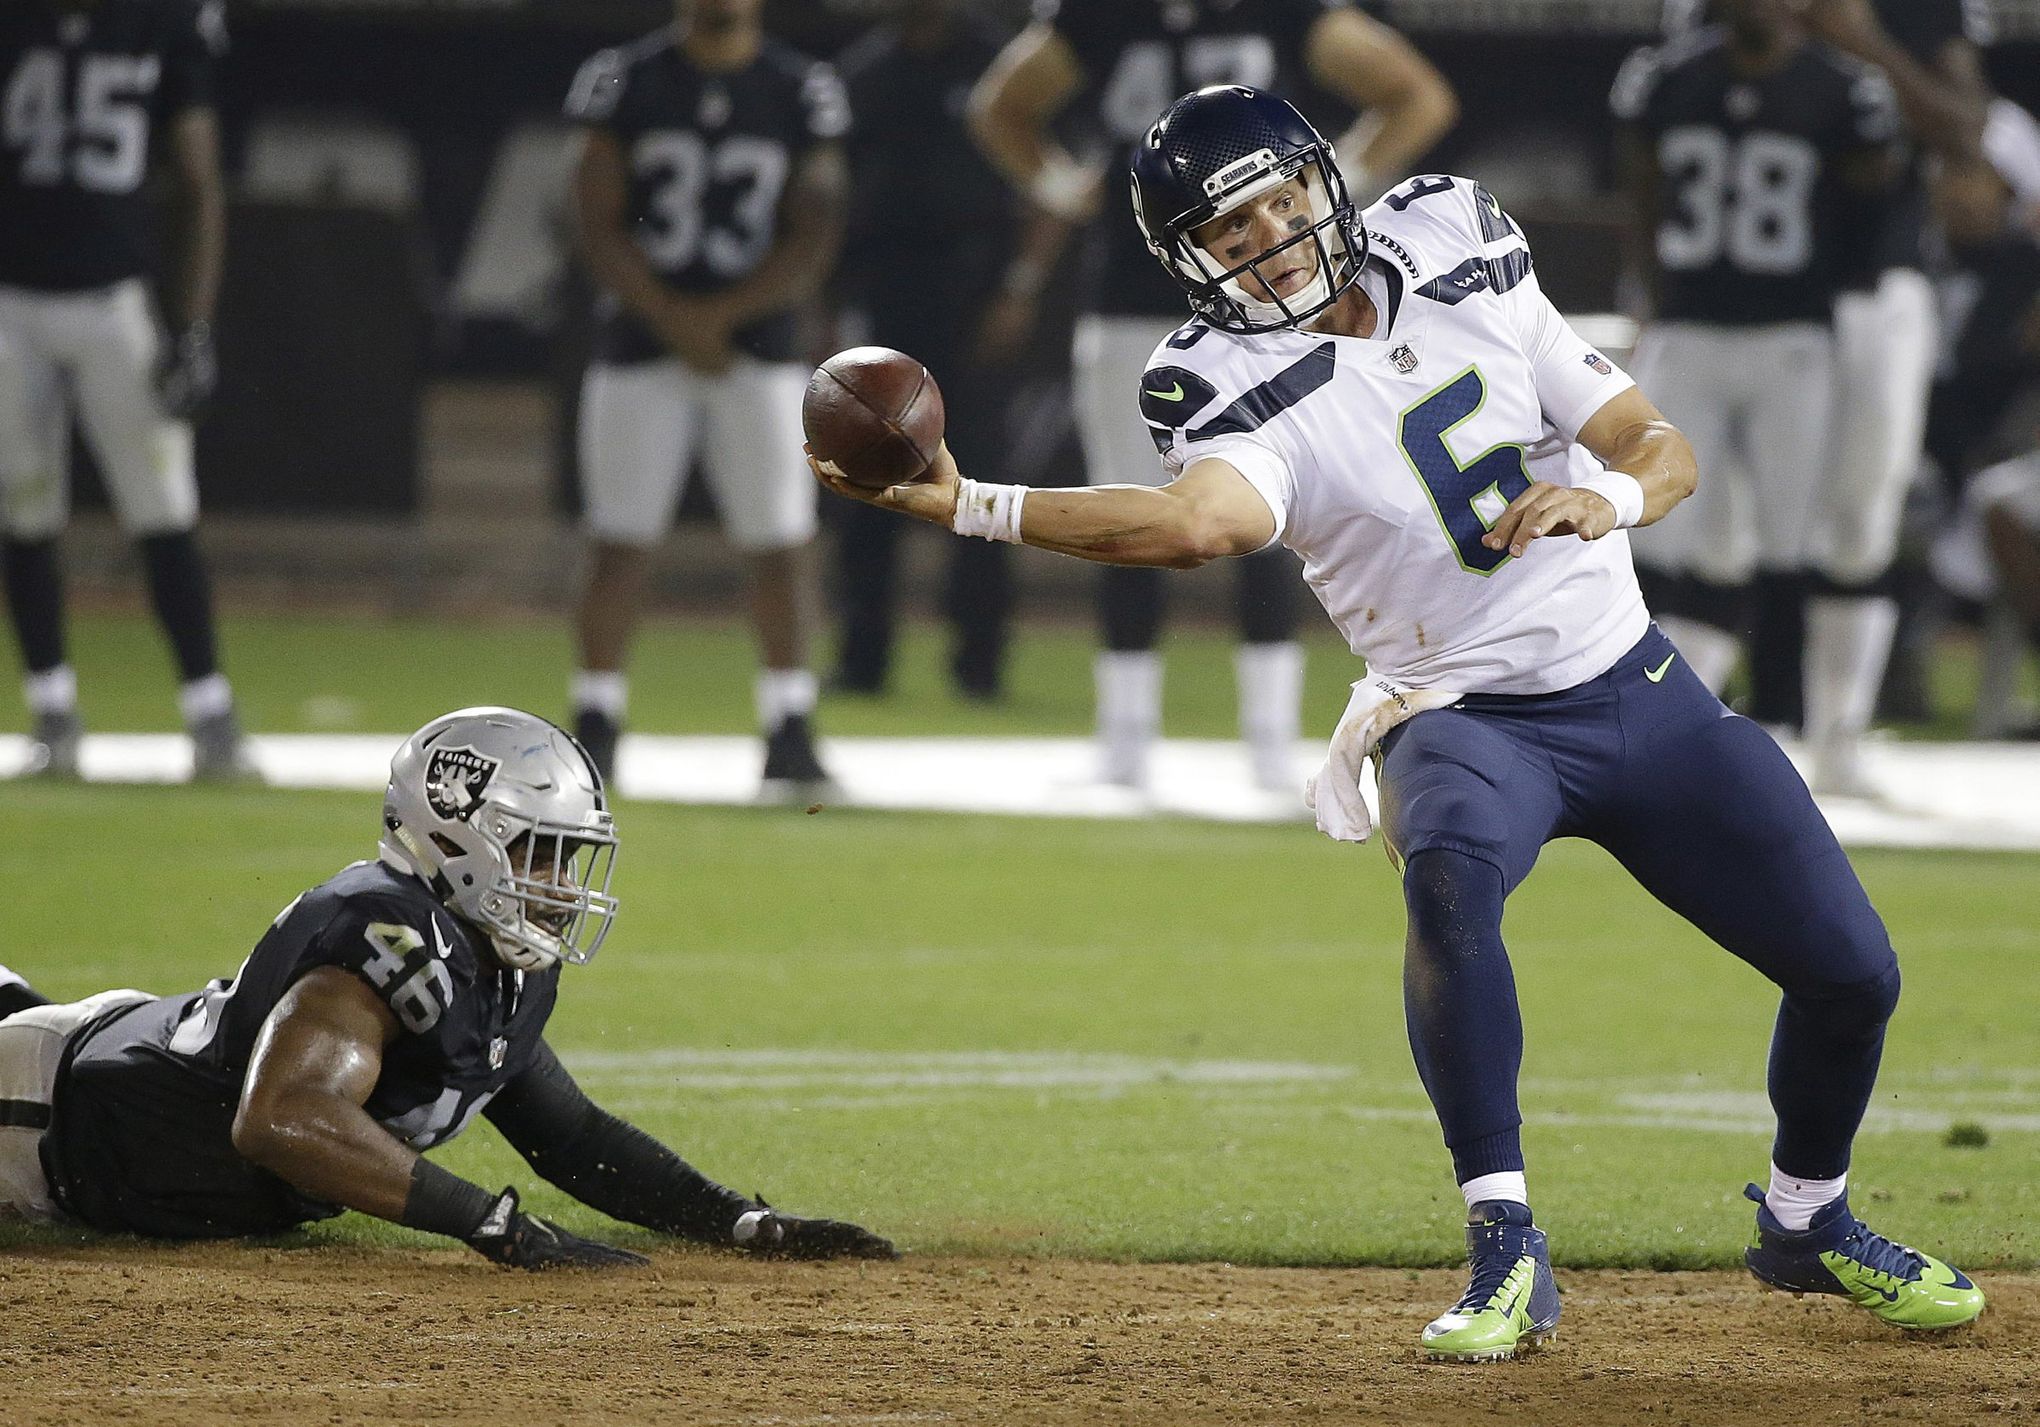 Five things to know about the Seahawks' next opponent, the Oakland Raiders